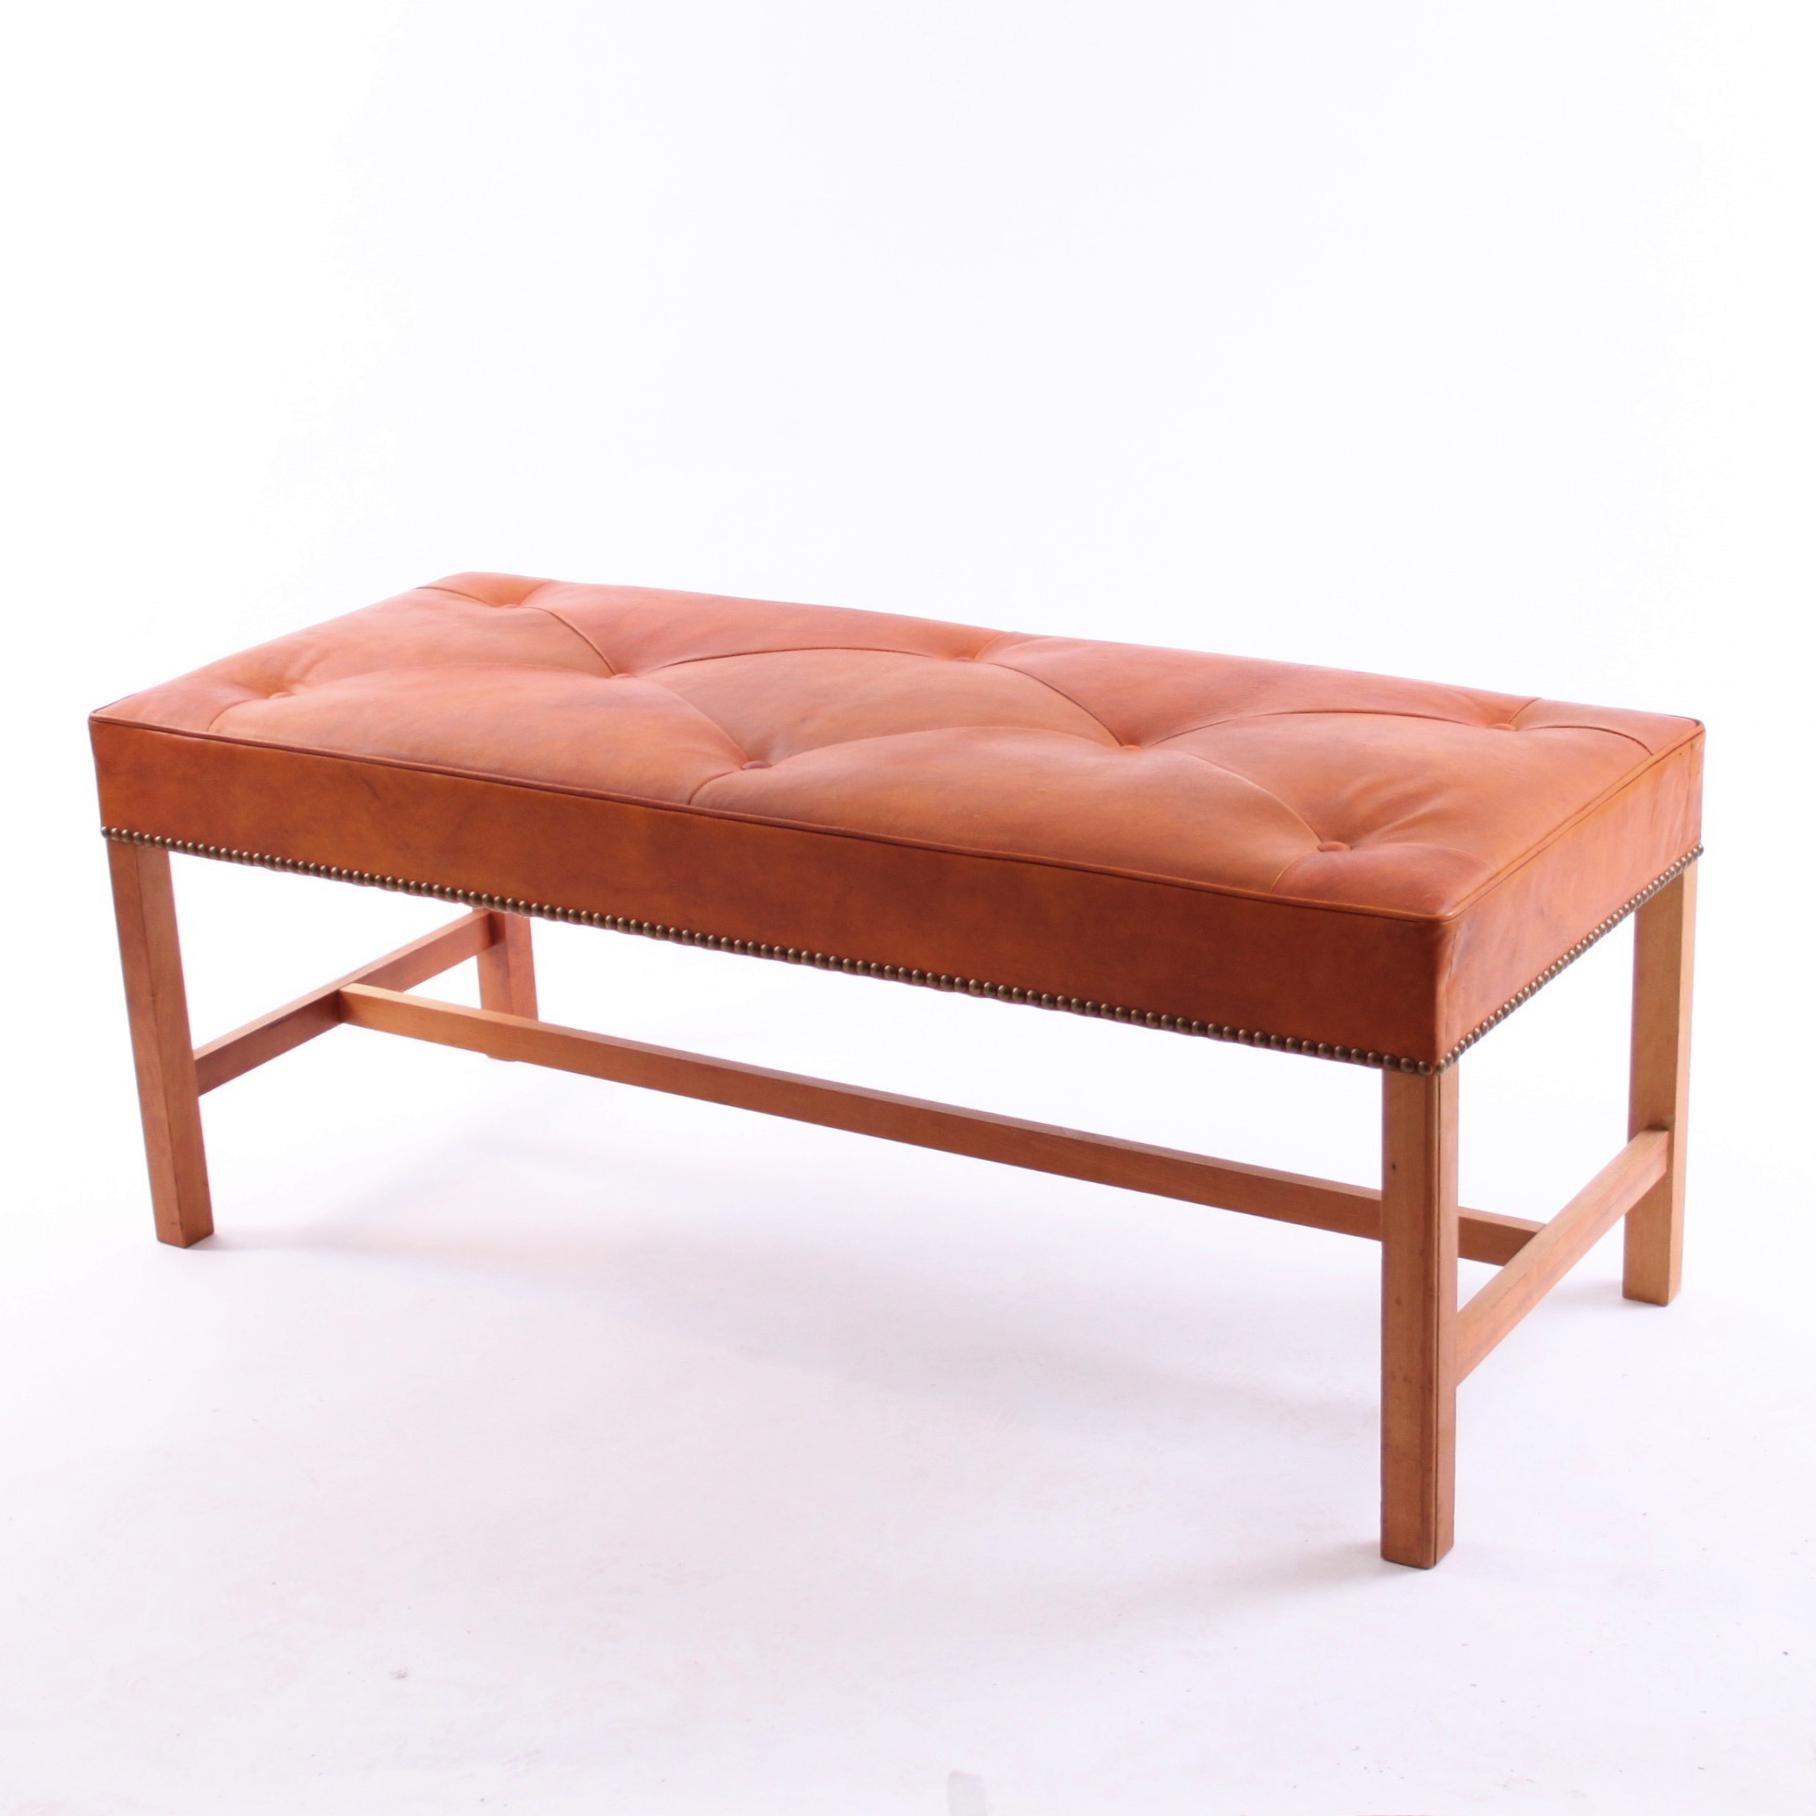 20th Century Pair of Josef Frank Benches, Mahogany and Niger Leather, 1950s